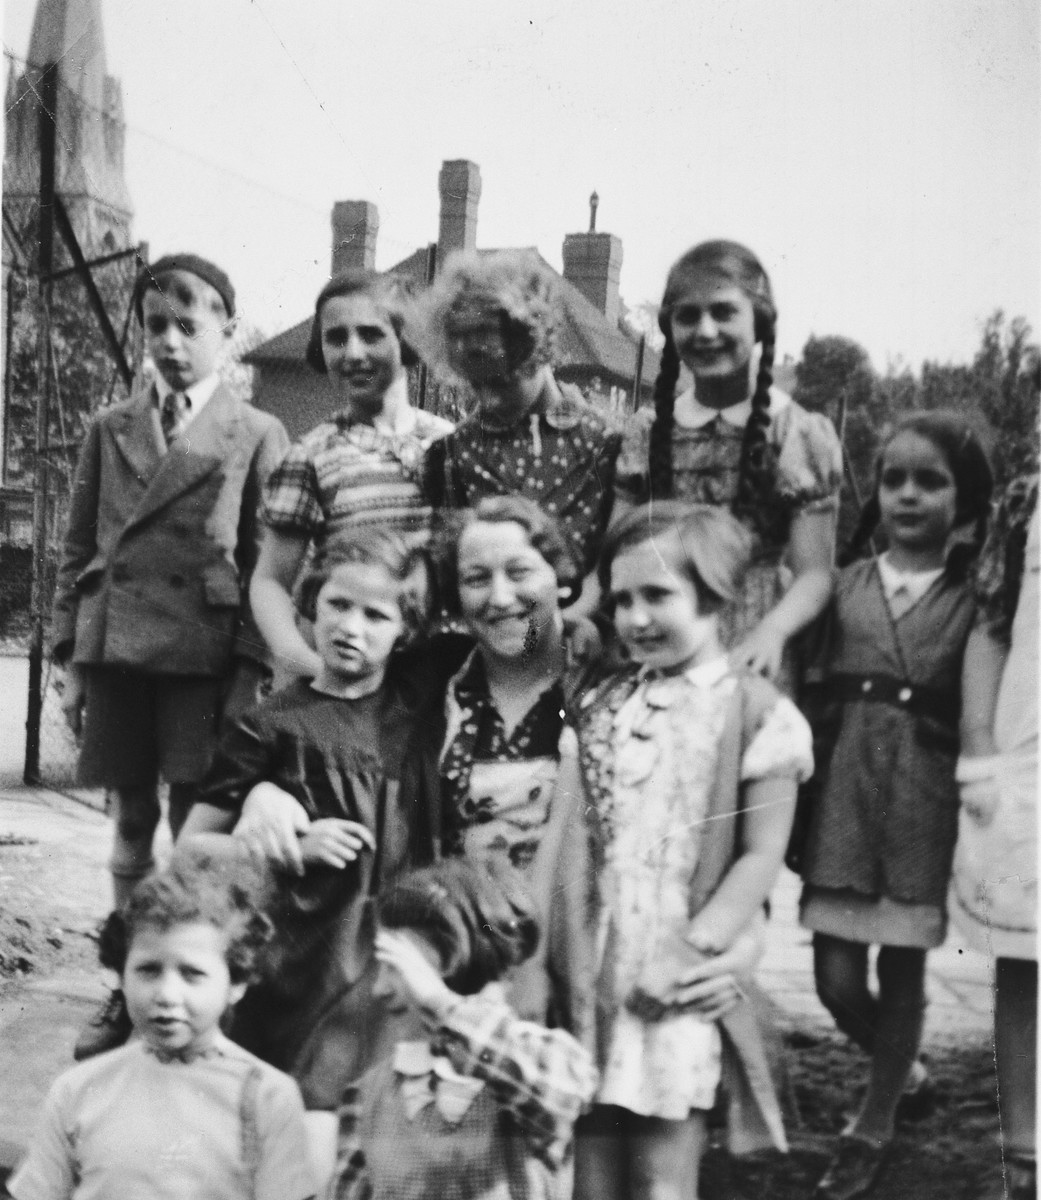 Group portrait of girls in from the 5th Avenue Hostel who came to England on a Kindertransport.

Henni Zajac is pictured standing on the left in the second row.  Pictured on the top row left is possibly Fred Gottlieb and on the top row right is possibly his sister, Miriam Gottlieb.